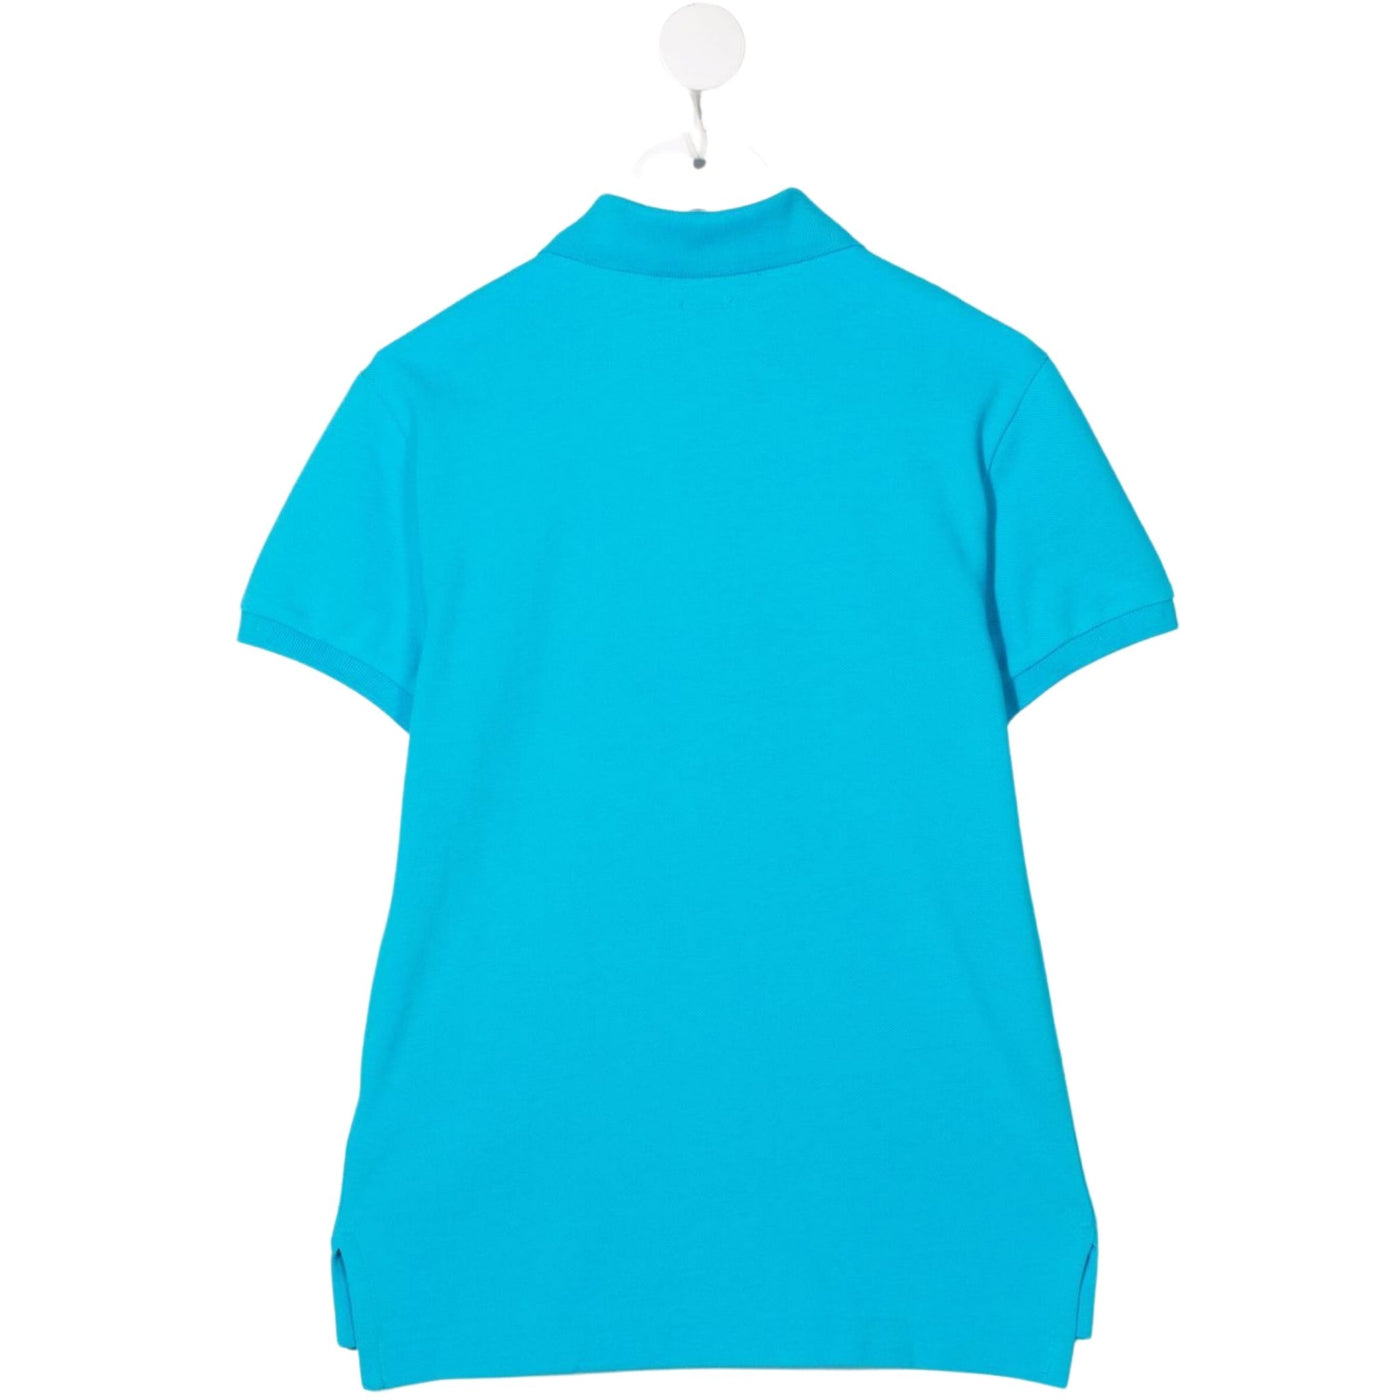 Boy's polo shirt in solid color with contrasting mini logo